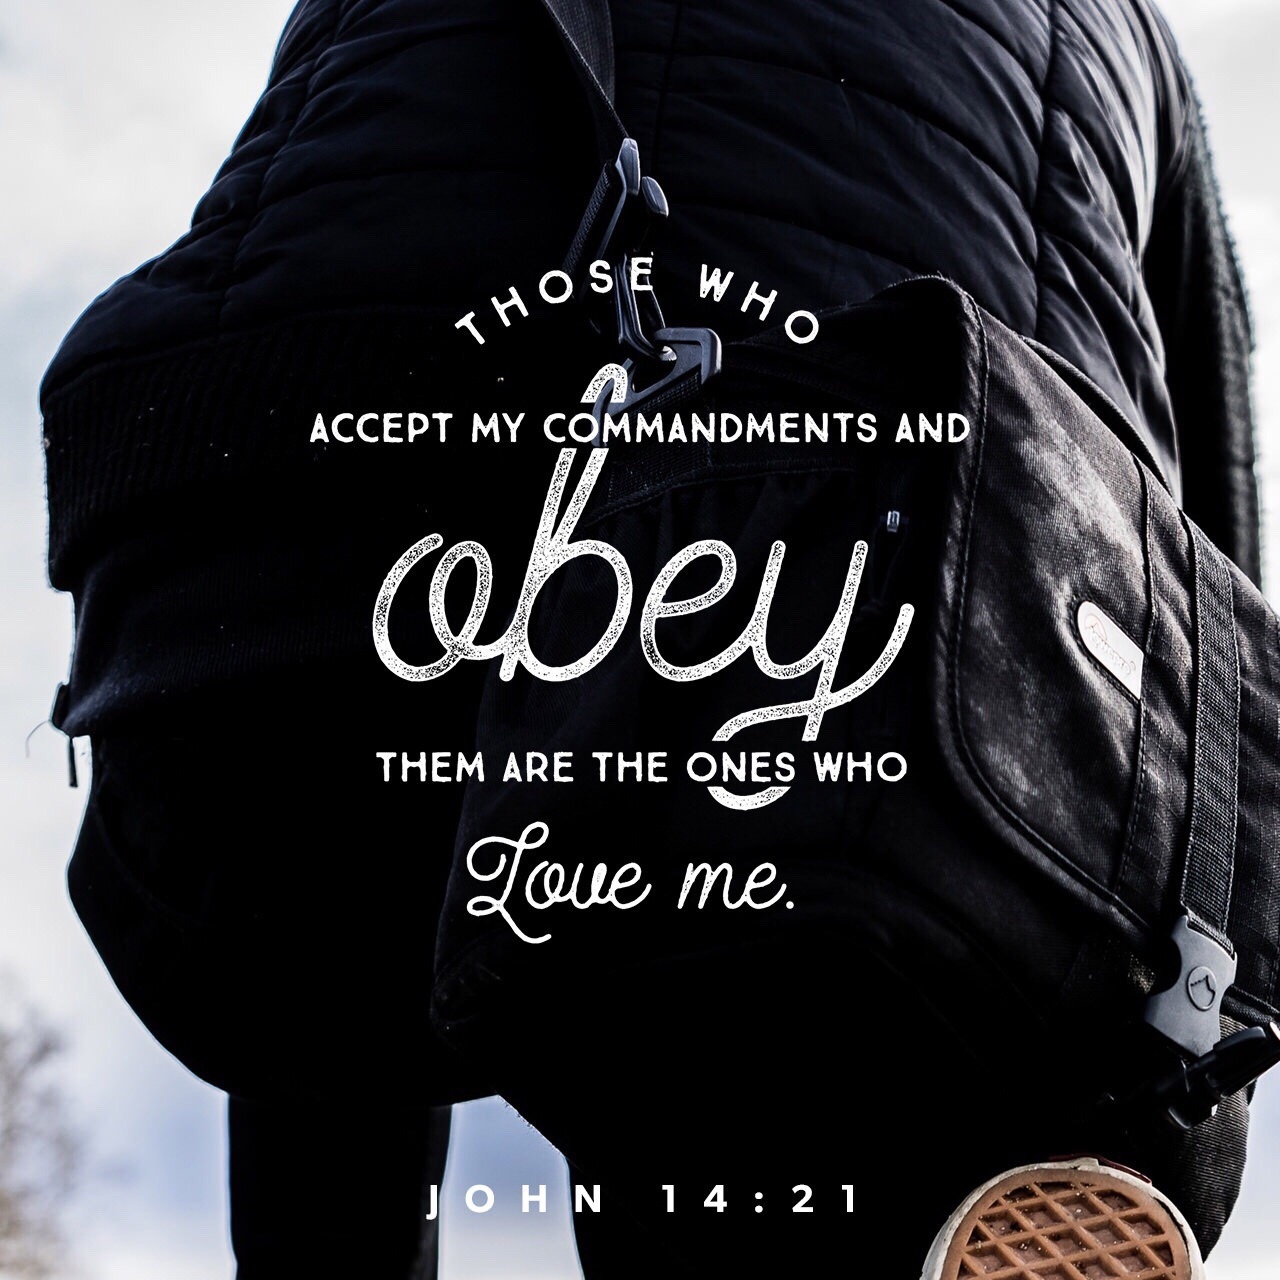 VOTD September 13 - He who has My commandments and keeps them is the one who loves Me; and he who loves Me will be loved by My Father, and I will love him and will disclose Myself to him. John‬ ‭14:21‬ ‭NASB‬‬